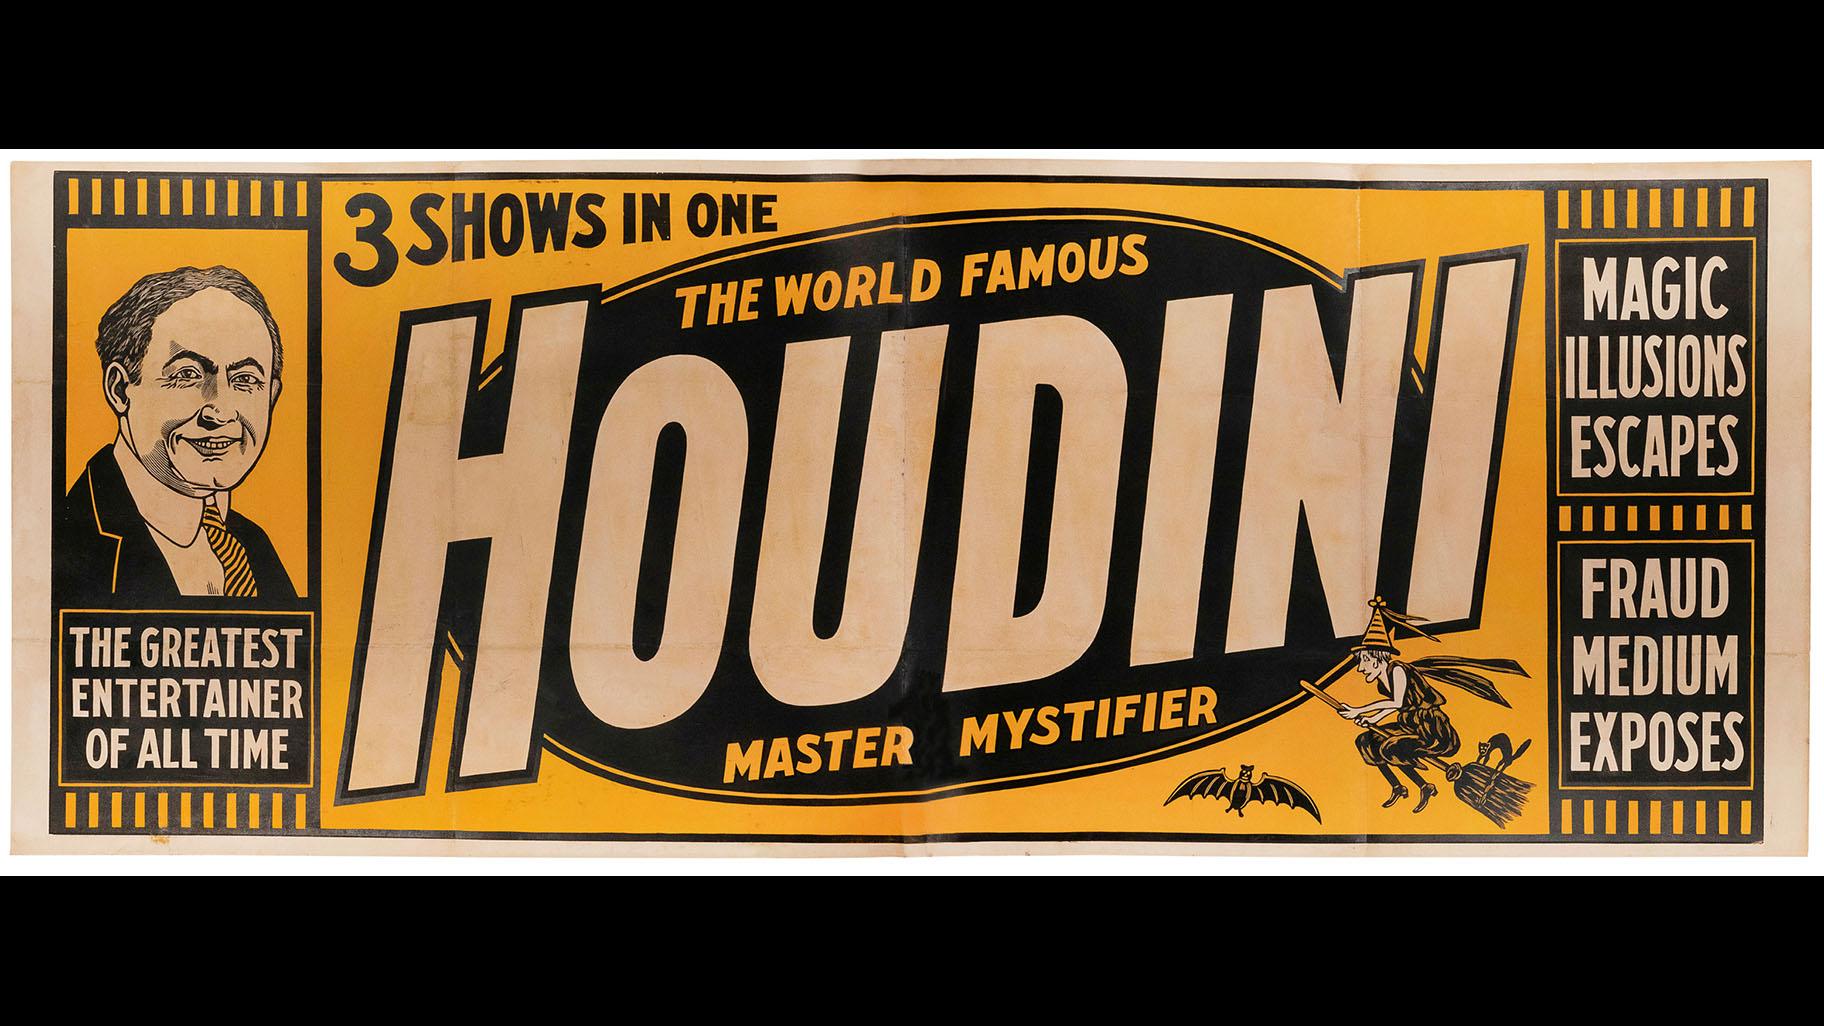 A poster from Harry Houdini’s final tour in 1926. (Credit: Potter & Potter Auctions)